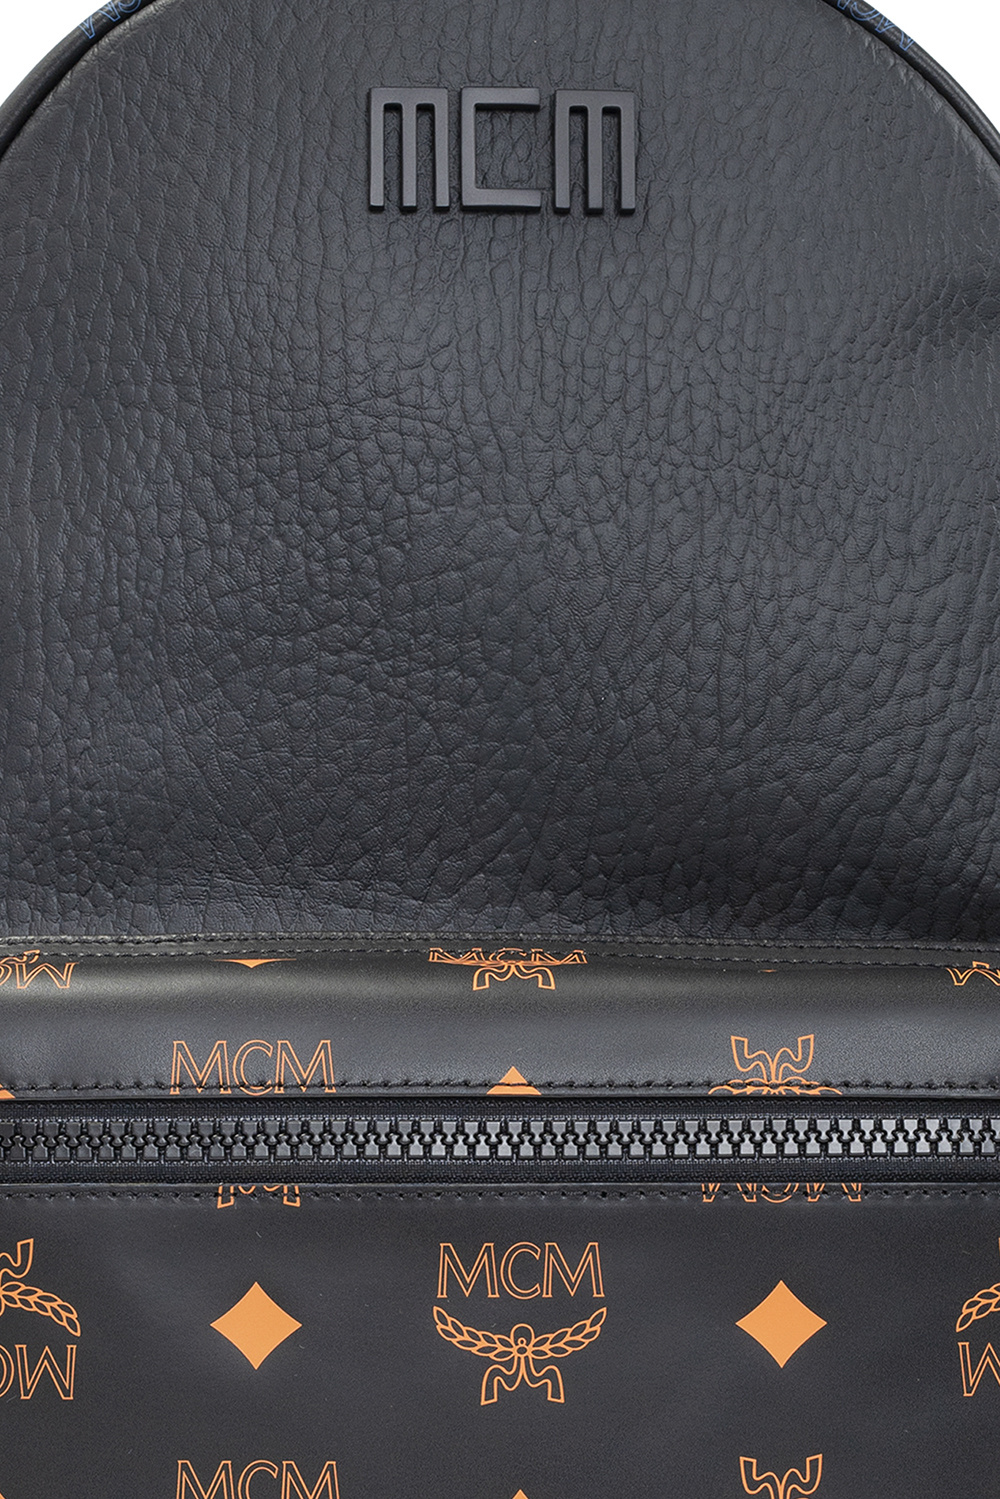 Fake Mcm Bags for Sale